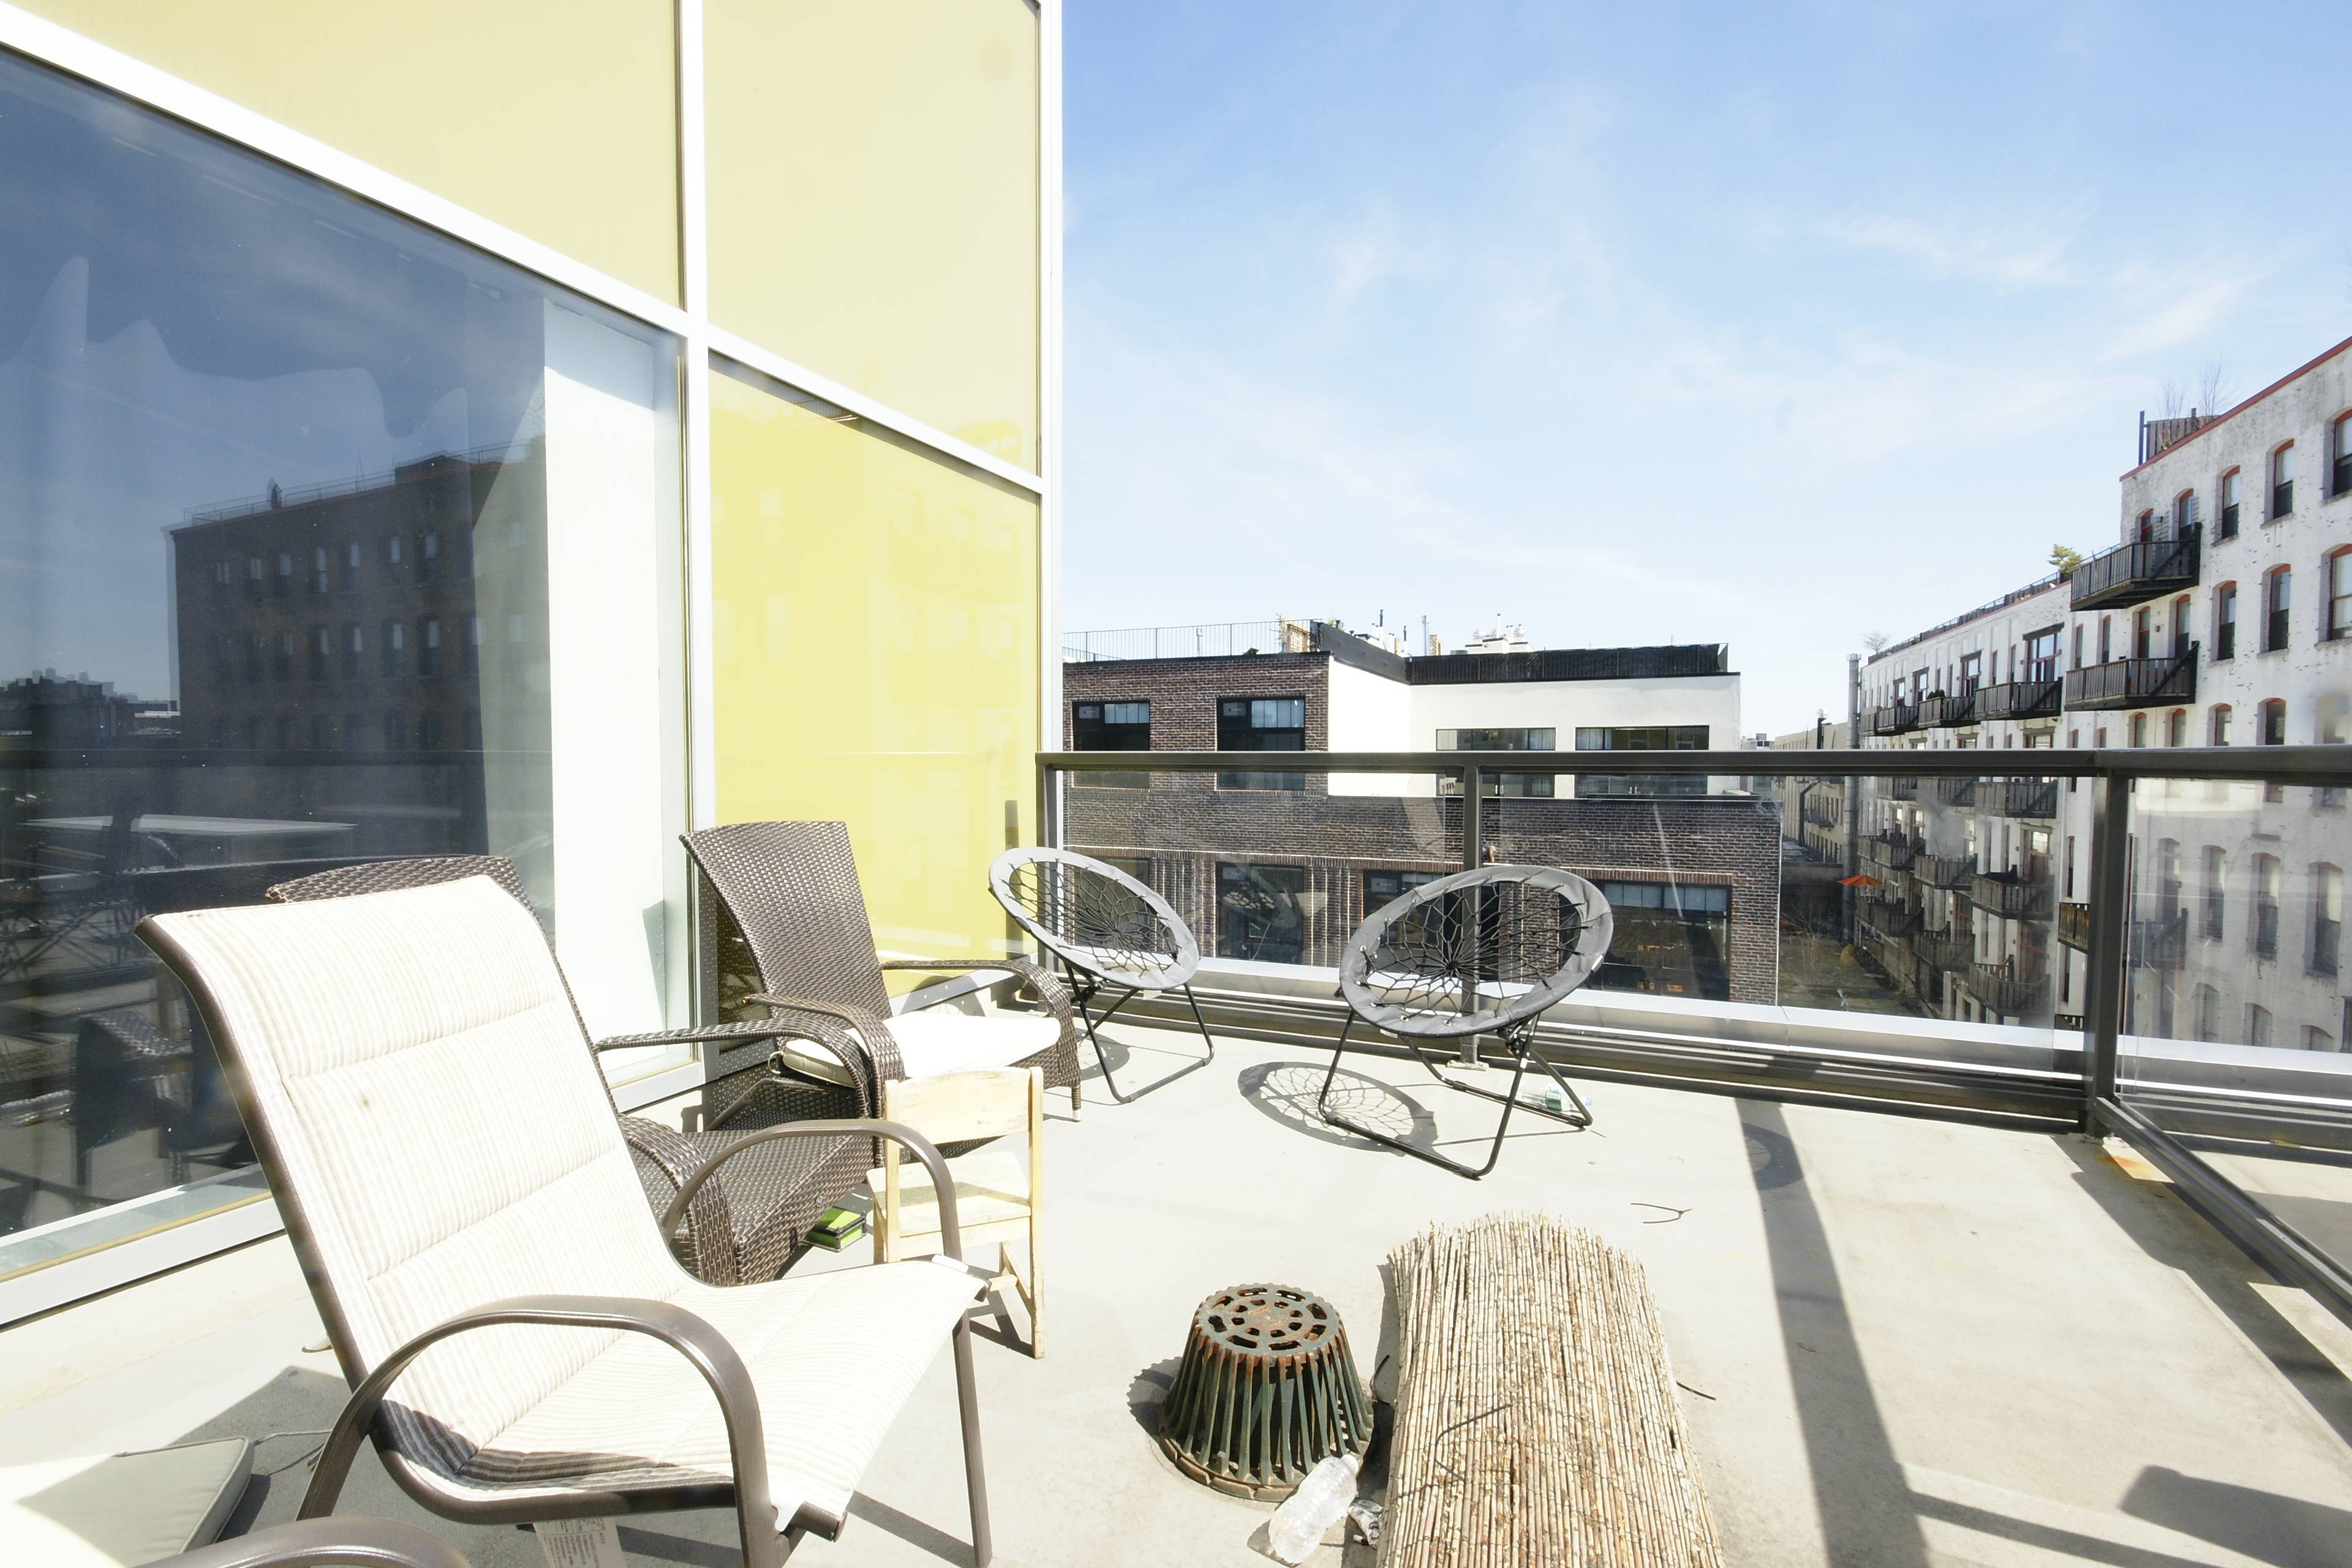 Williamsburg Penthouse 1 Bedroom Plus Loft Space w/Private Roof Terrace in Modern Amenity Building